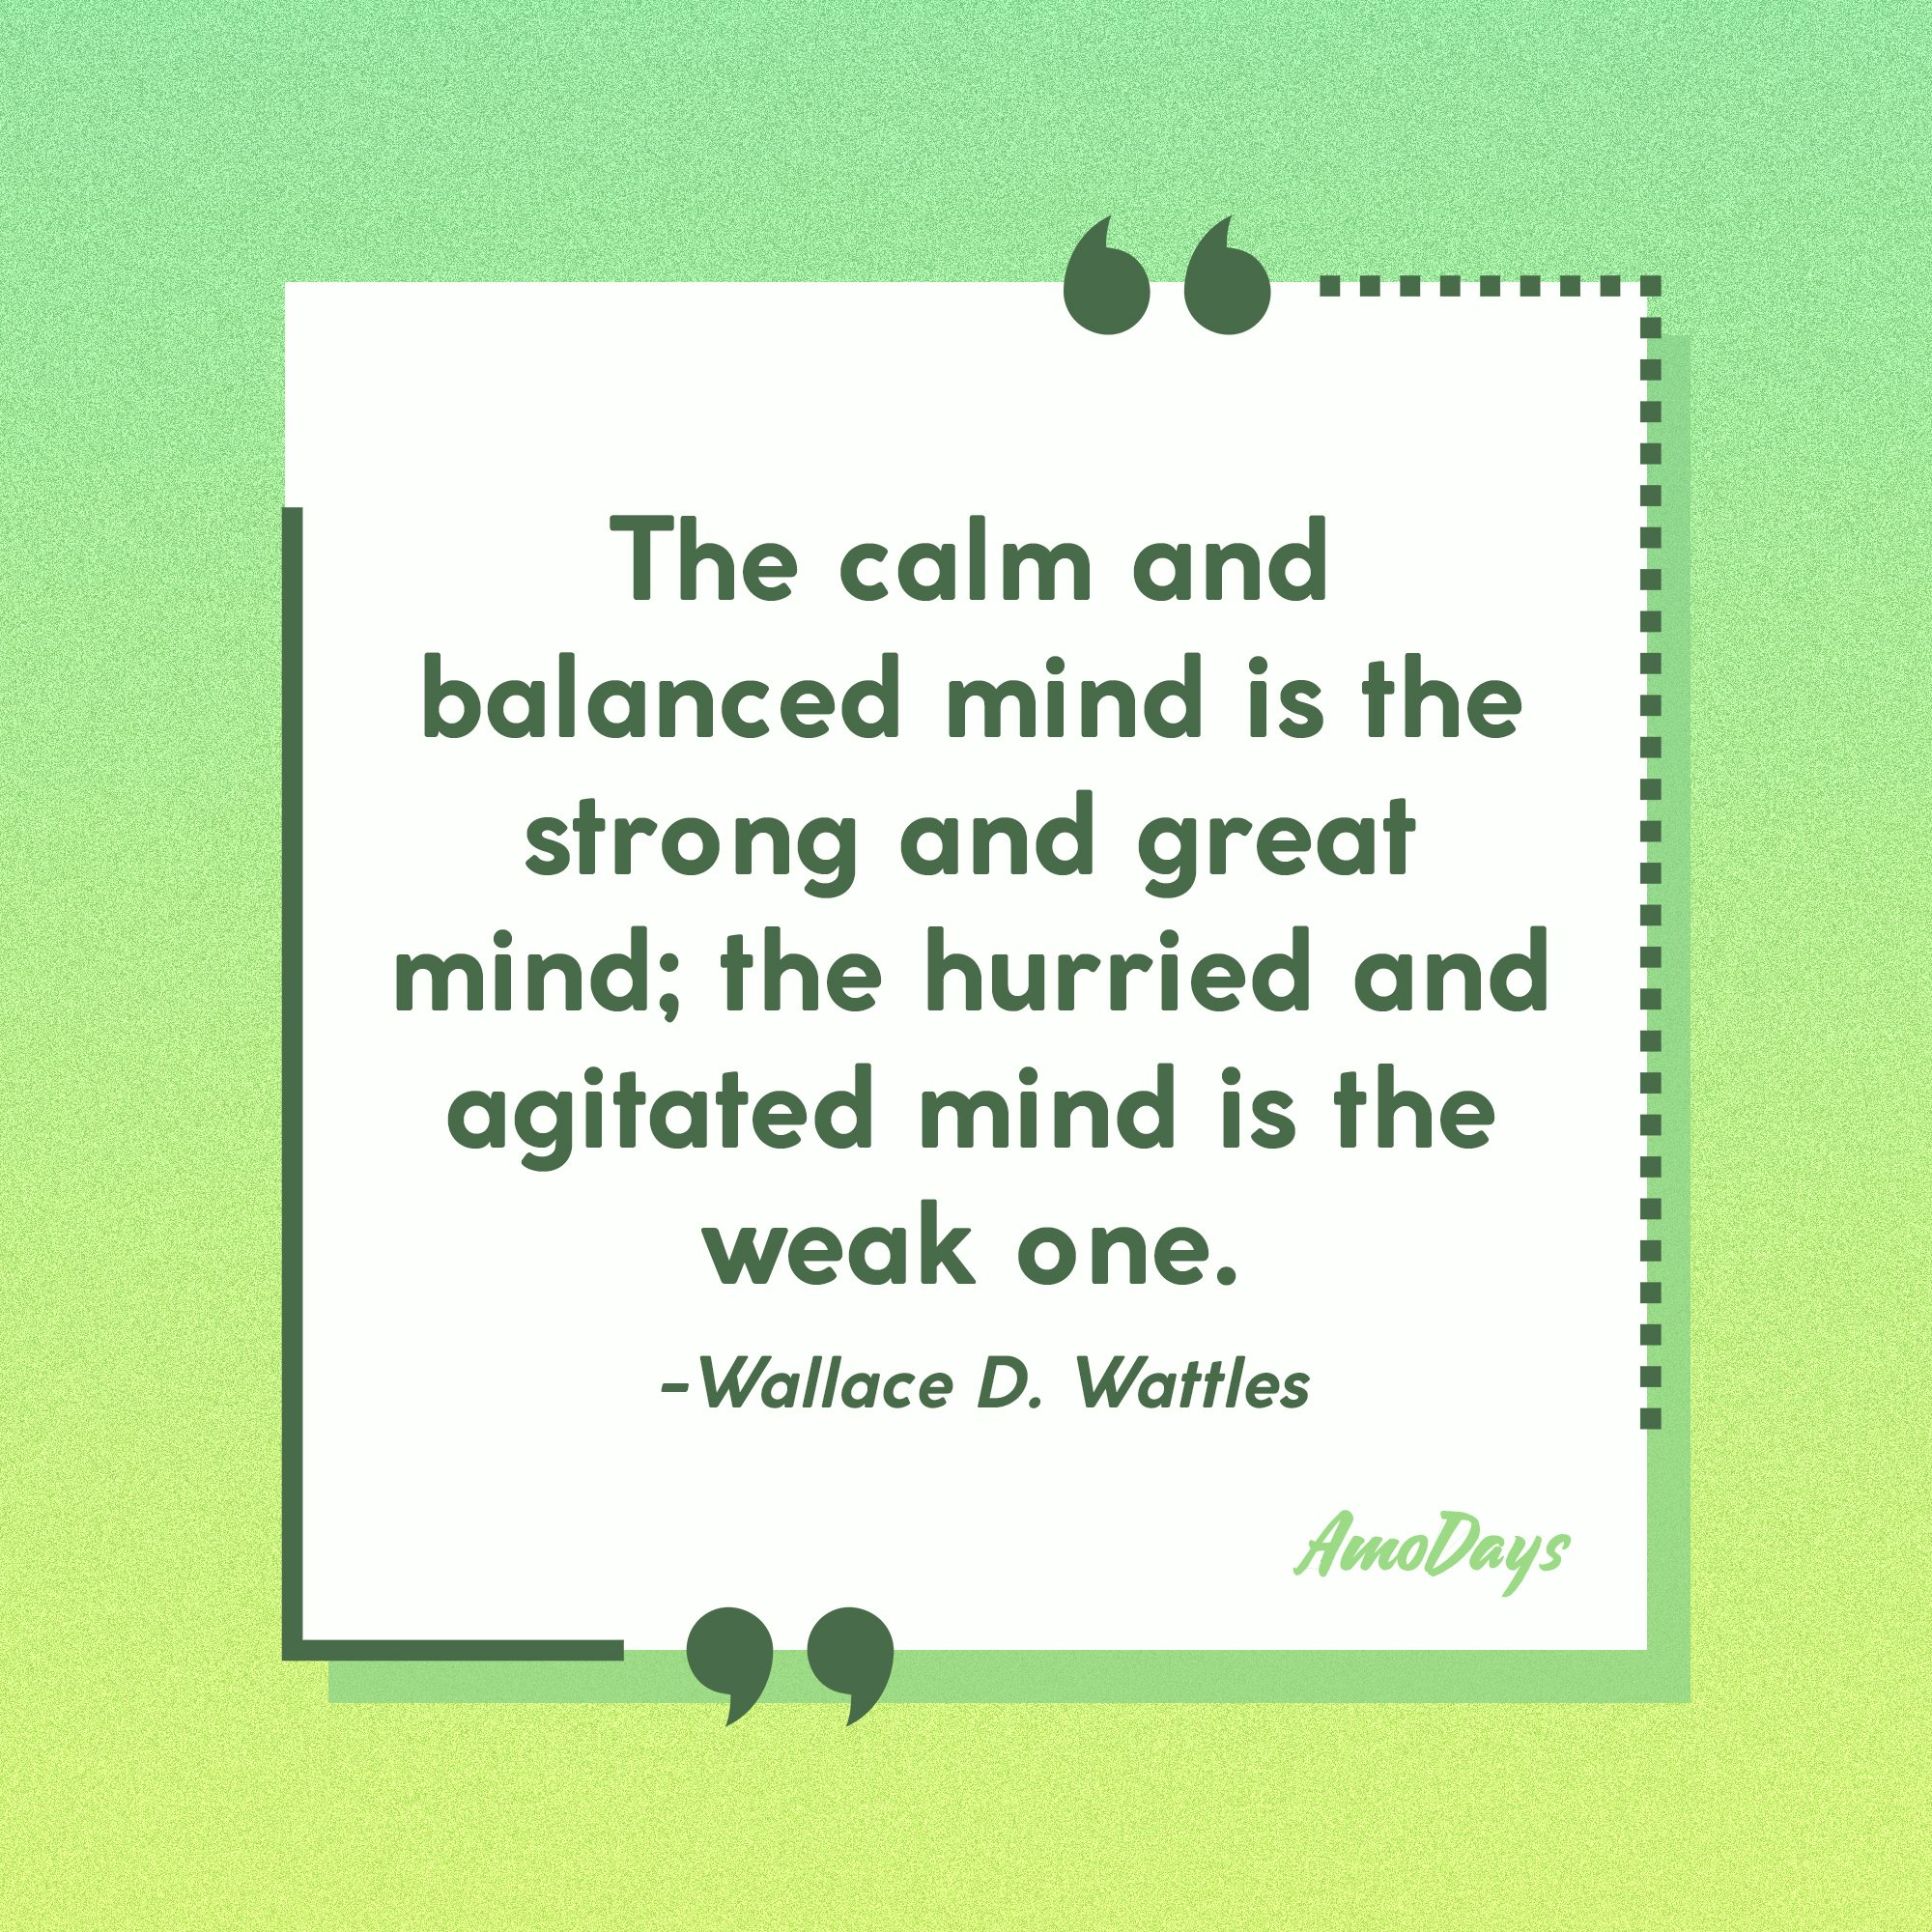 Wallace D. Wattles's quote: “The calm and balanced mind is the strong and great mind; the hurried and agitated mind is the weak one.” | Image: Amodays